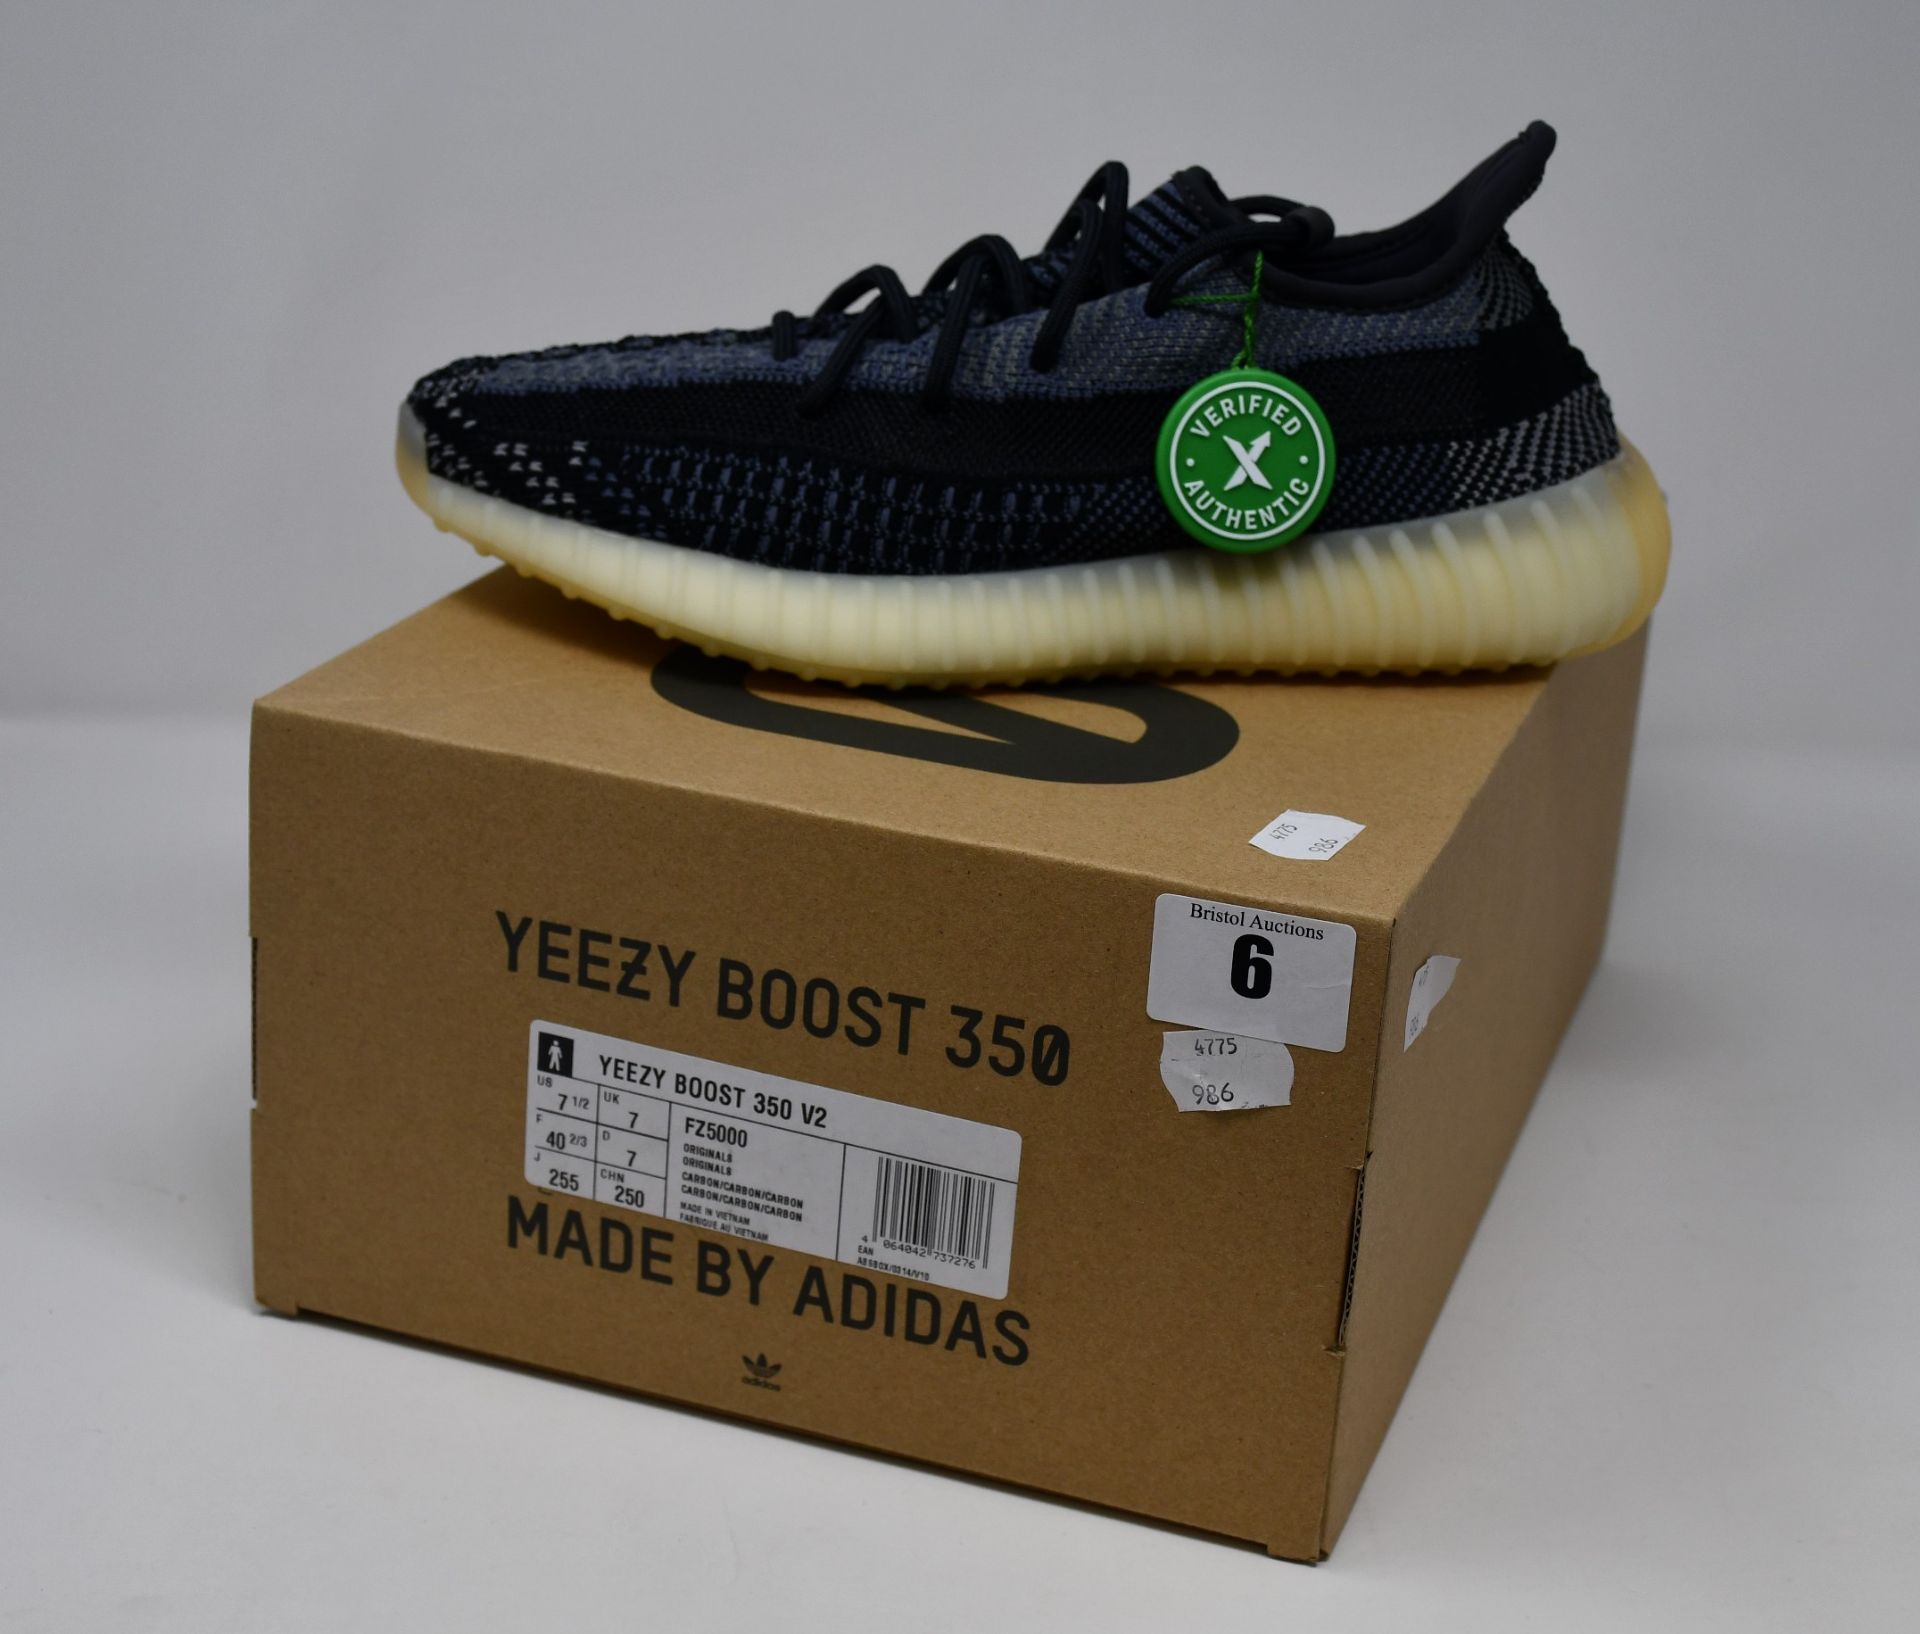 A pair of as new Adidas Yeezy Boost 350 V2 trainers (UK 7).